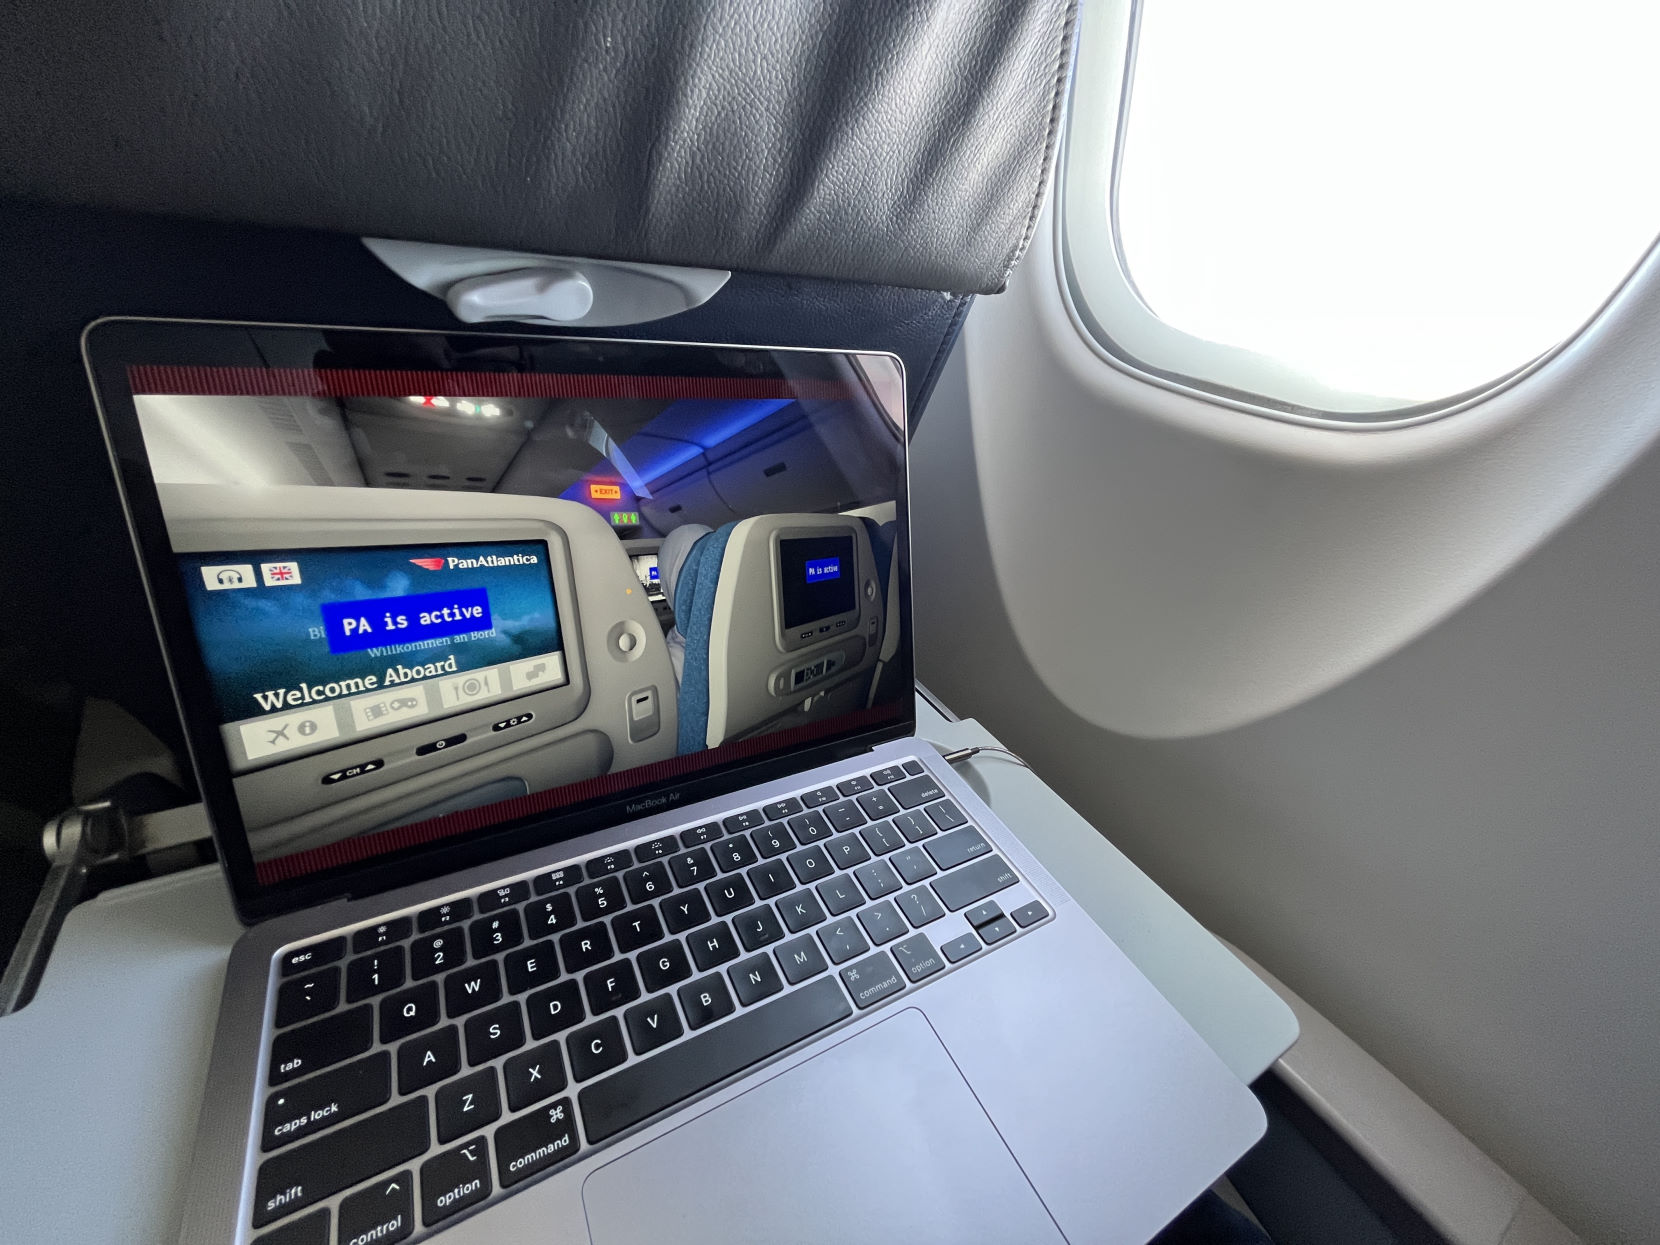 A laptop on an airplane tray table, playing the game Airplane Mode